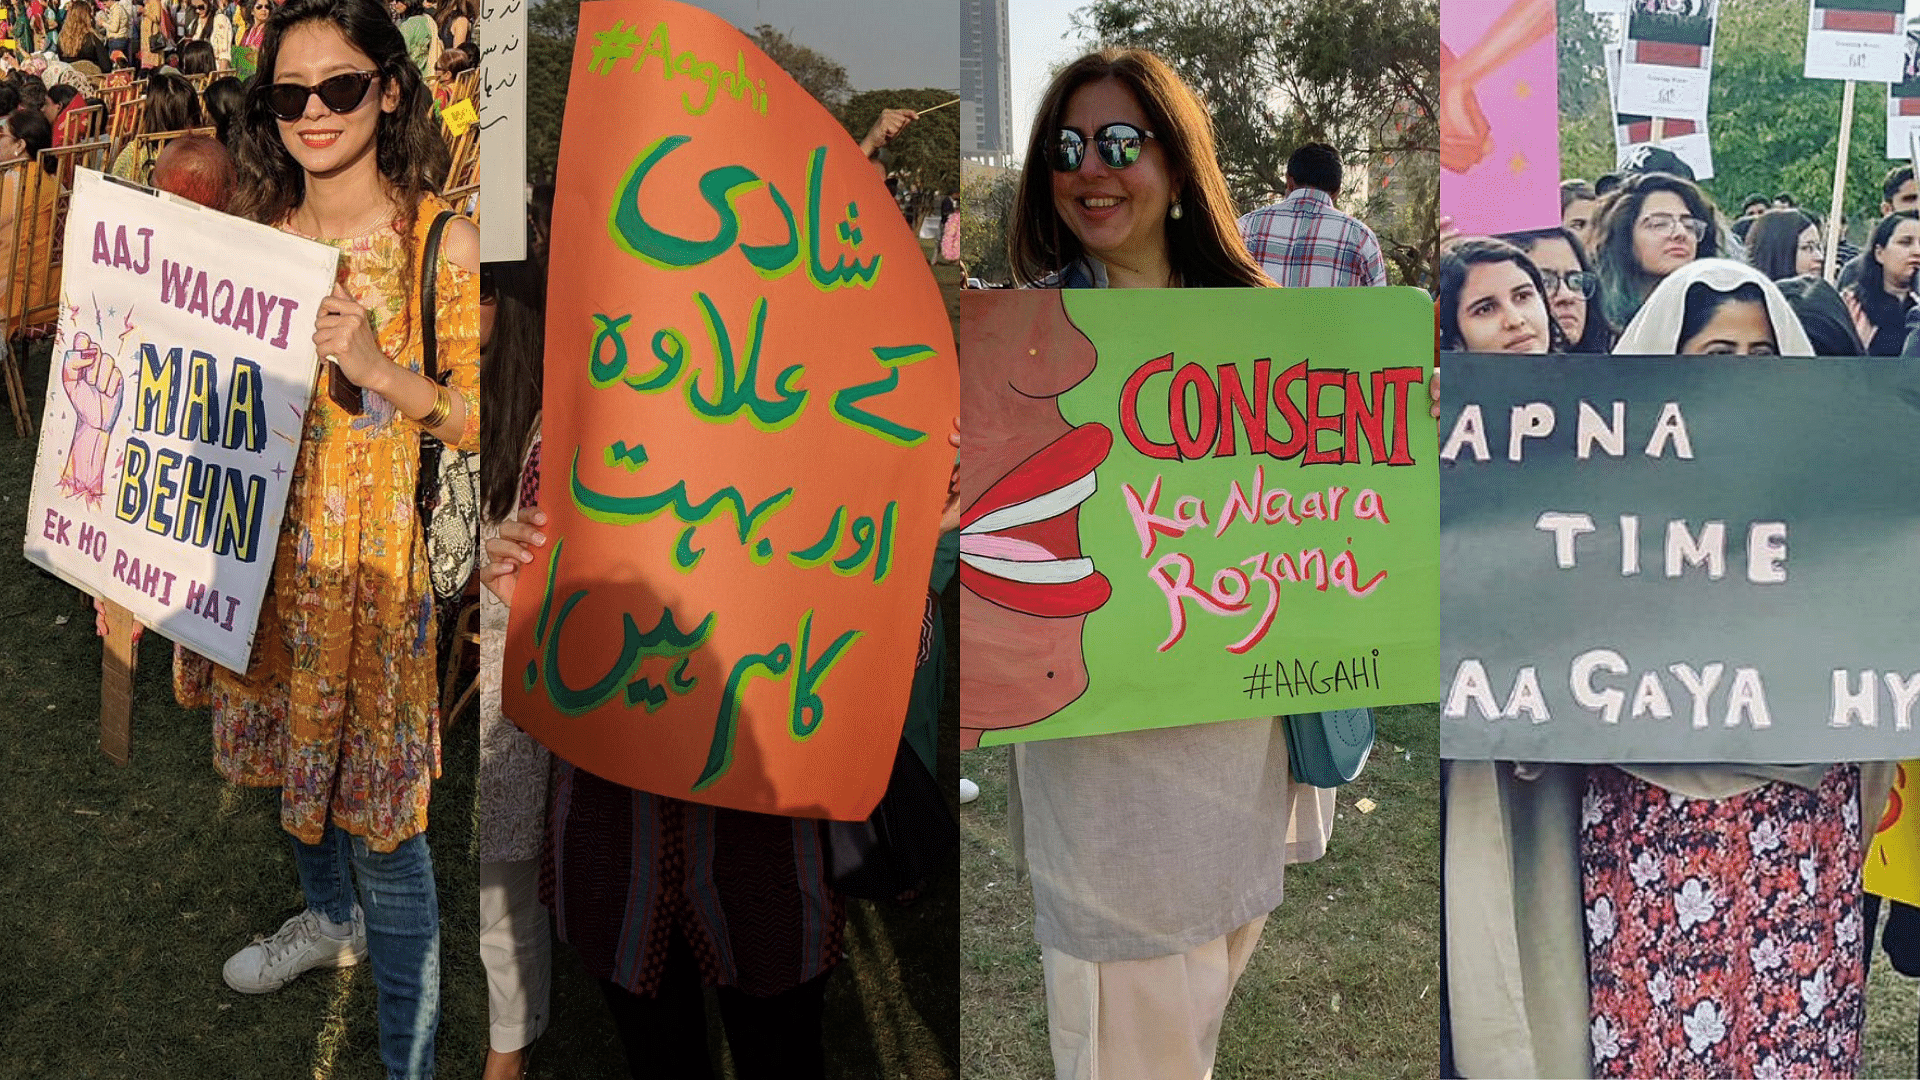 Some photos from ‘Aurat March 2019’ that happened in different cities in Pakistan on International Women’s Day.